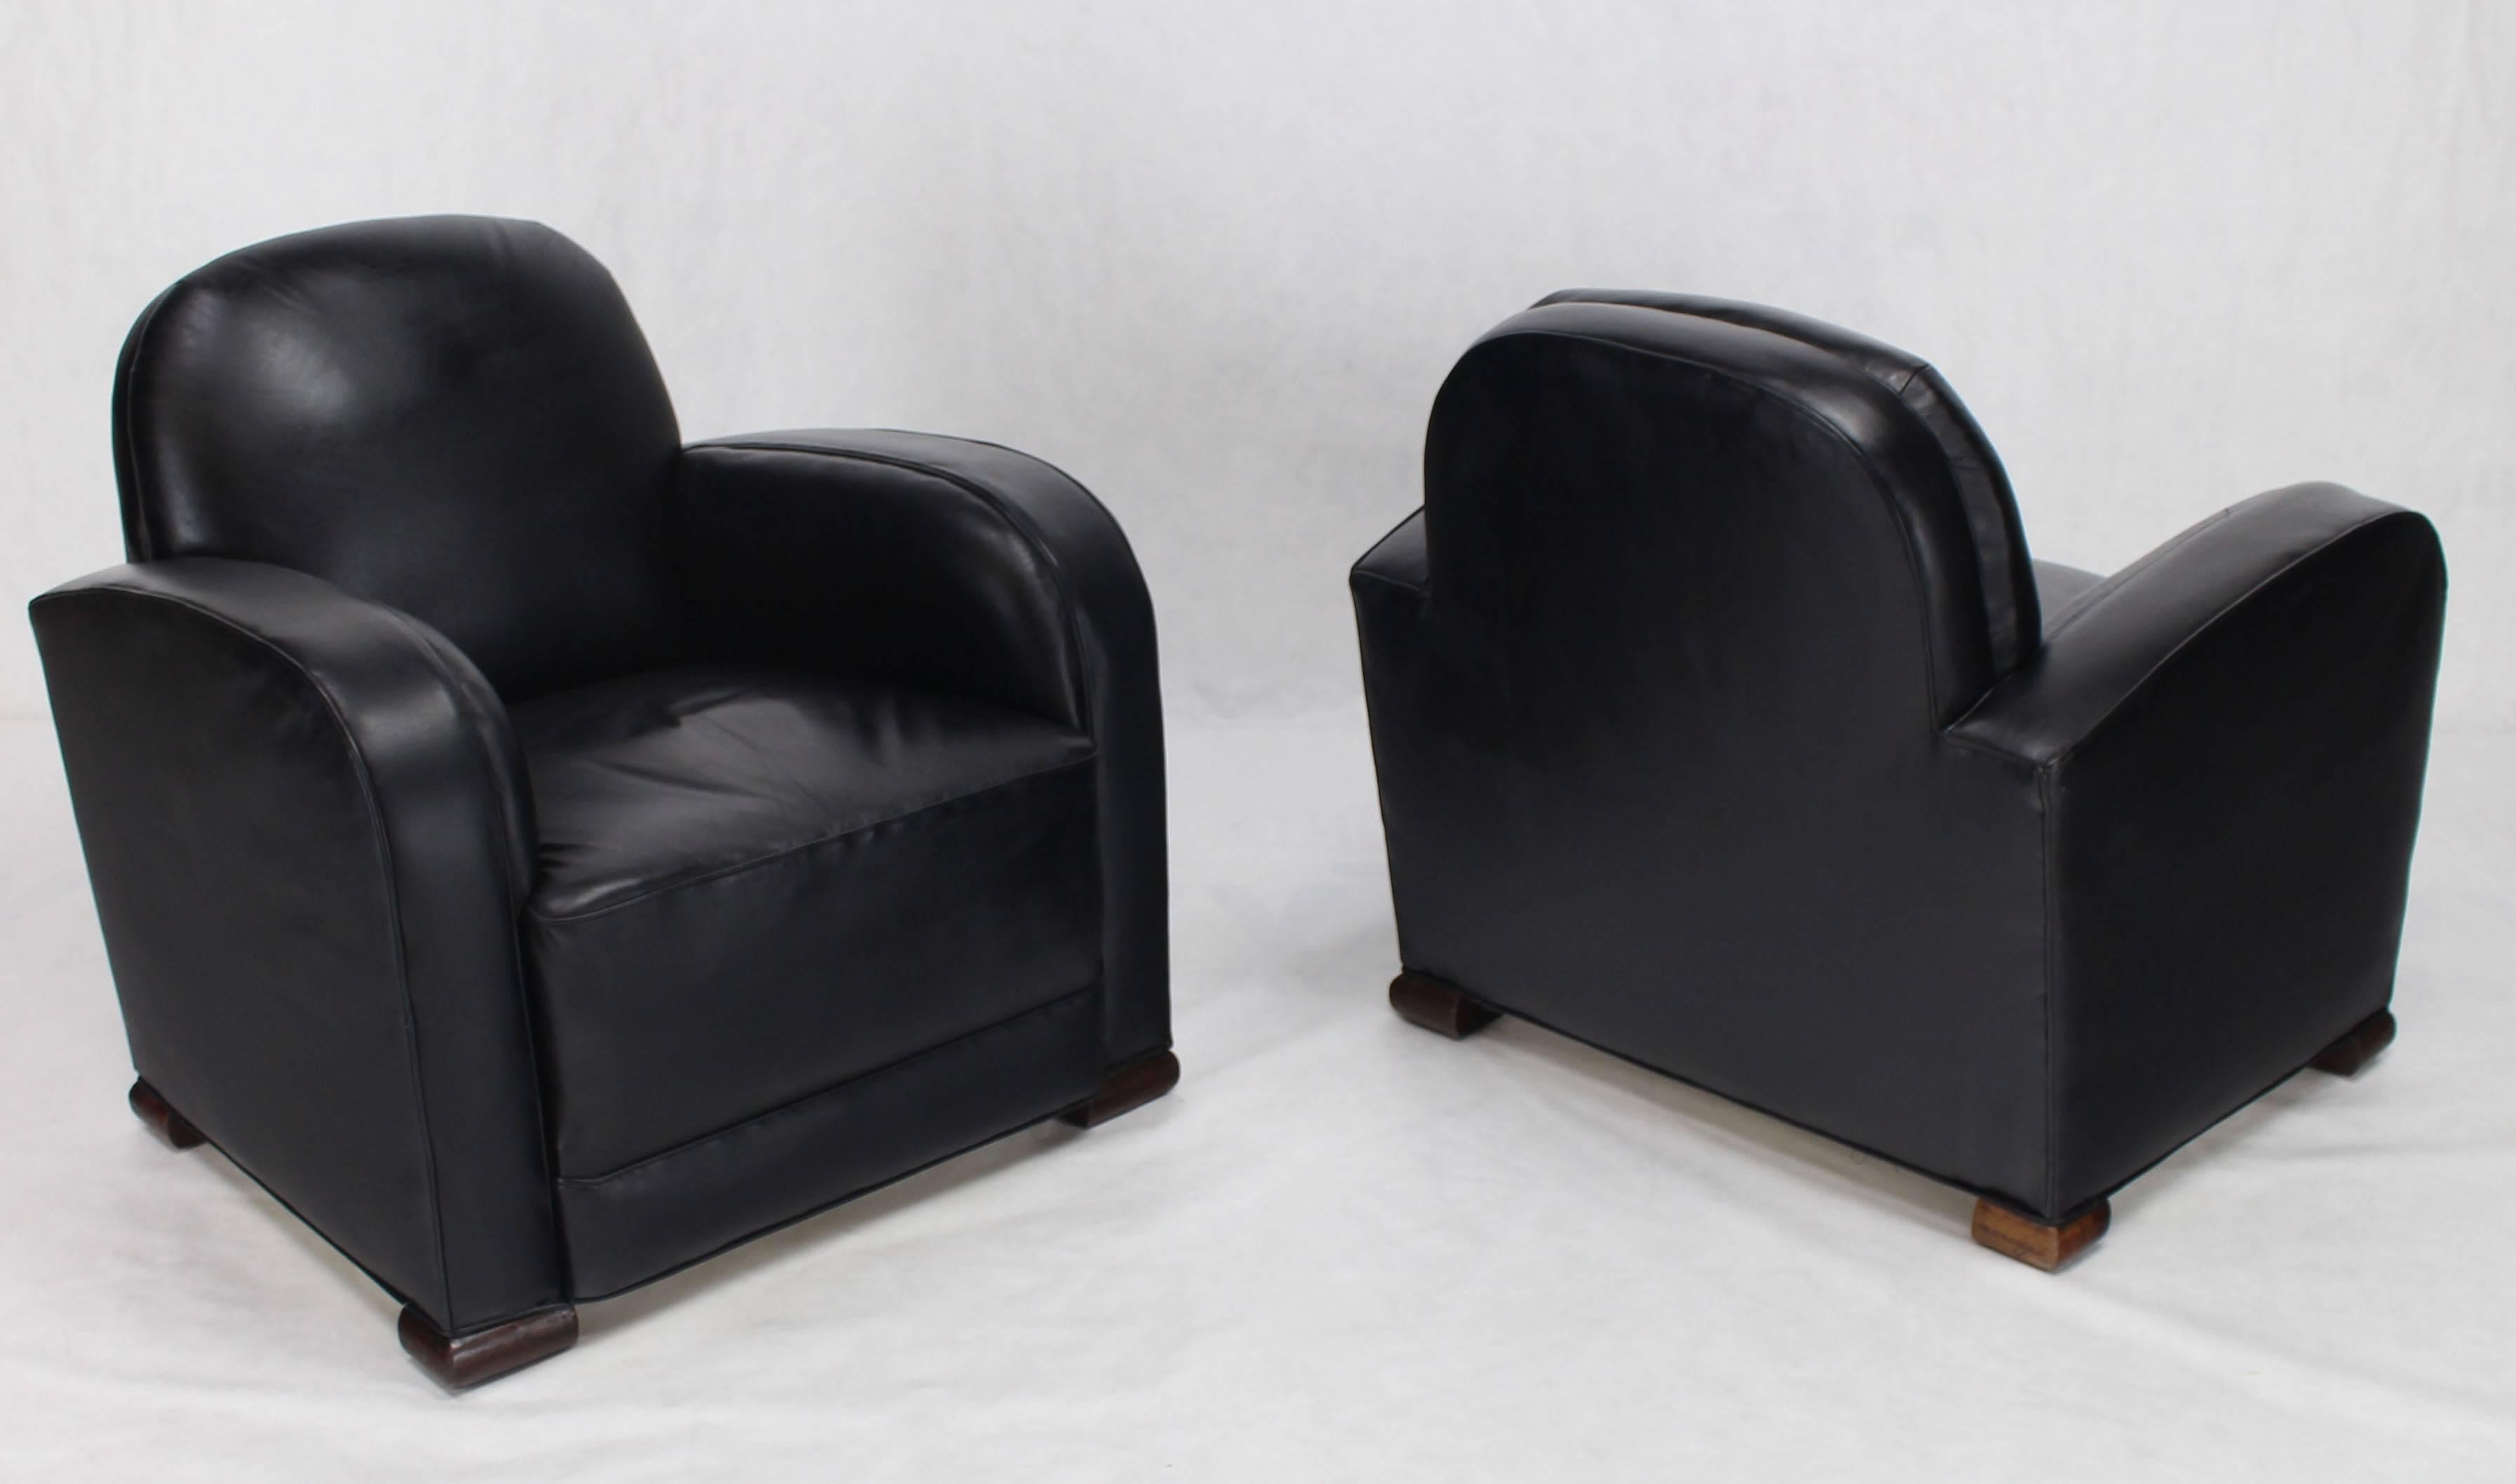 20th Century Pair of Black Leather Thick Arm Rests Lounge Deco Tank Chairs 